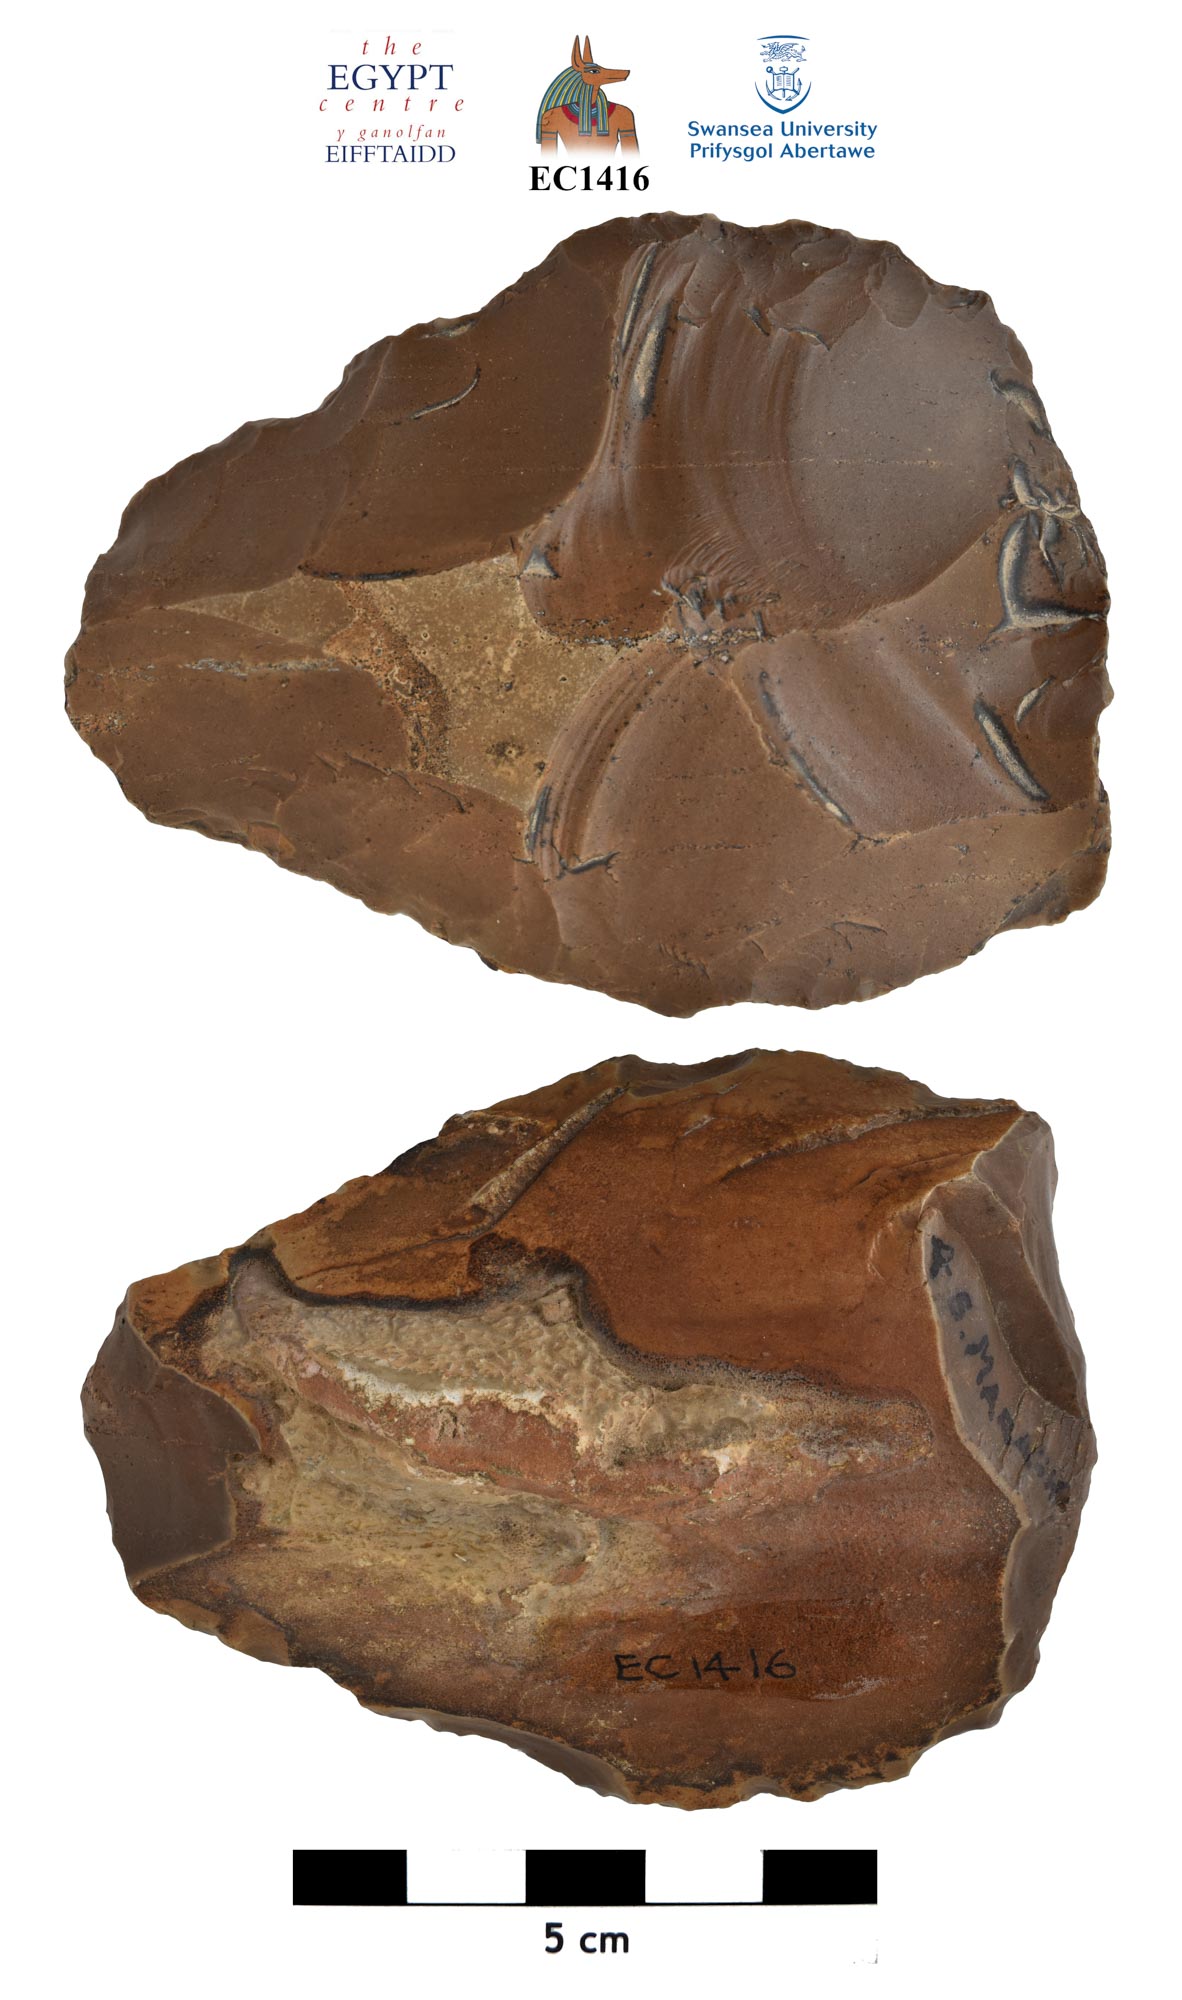 Image for: Handaxe